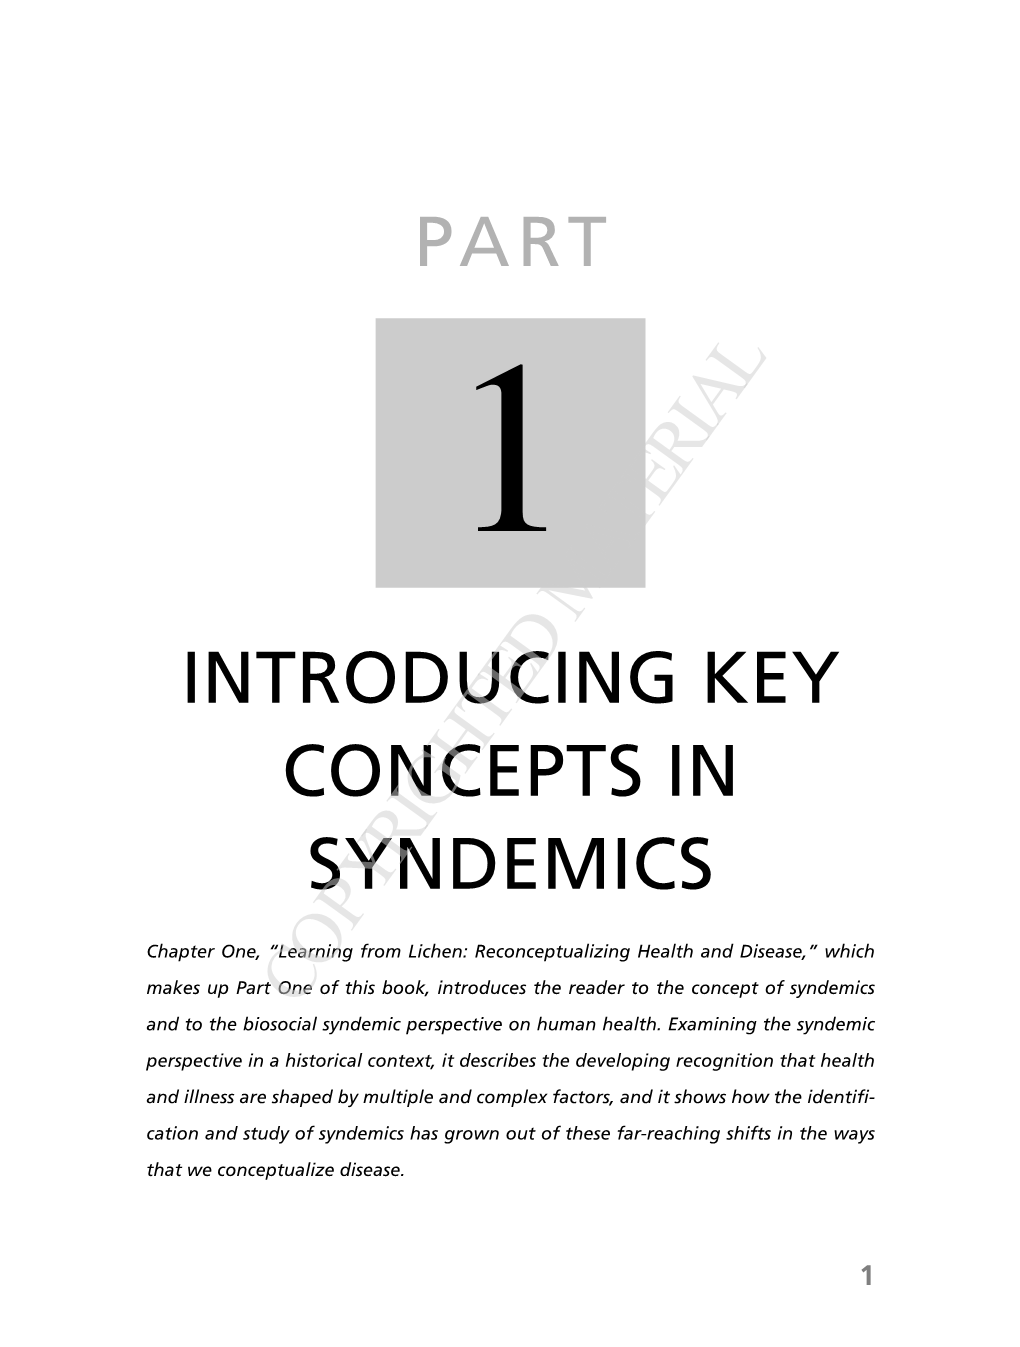 Introducing Key Concepts in Syndemics